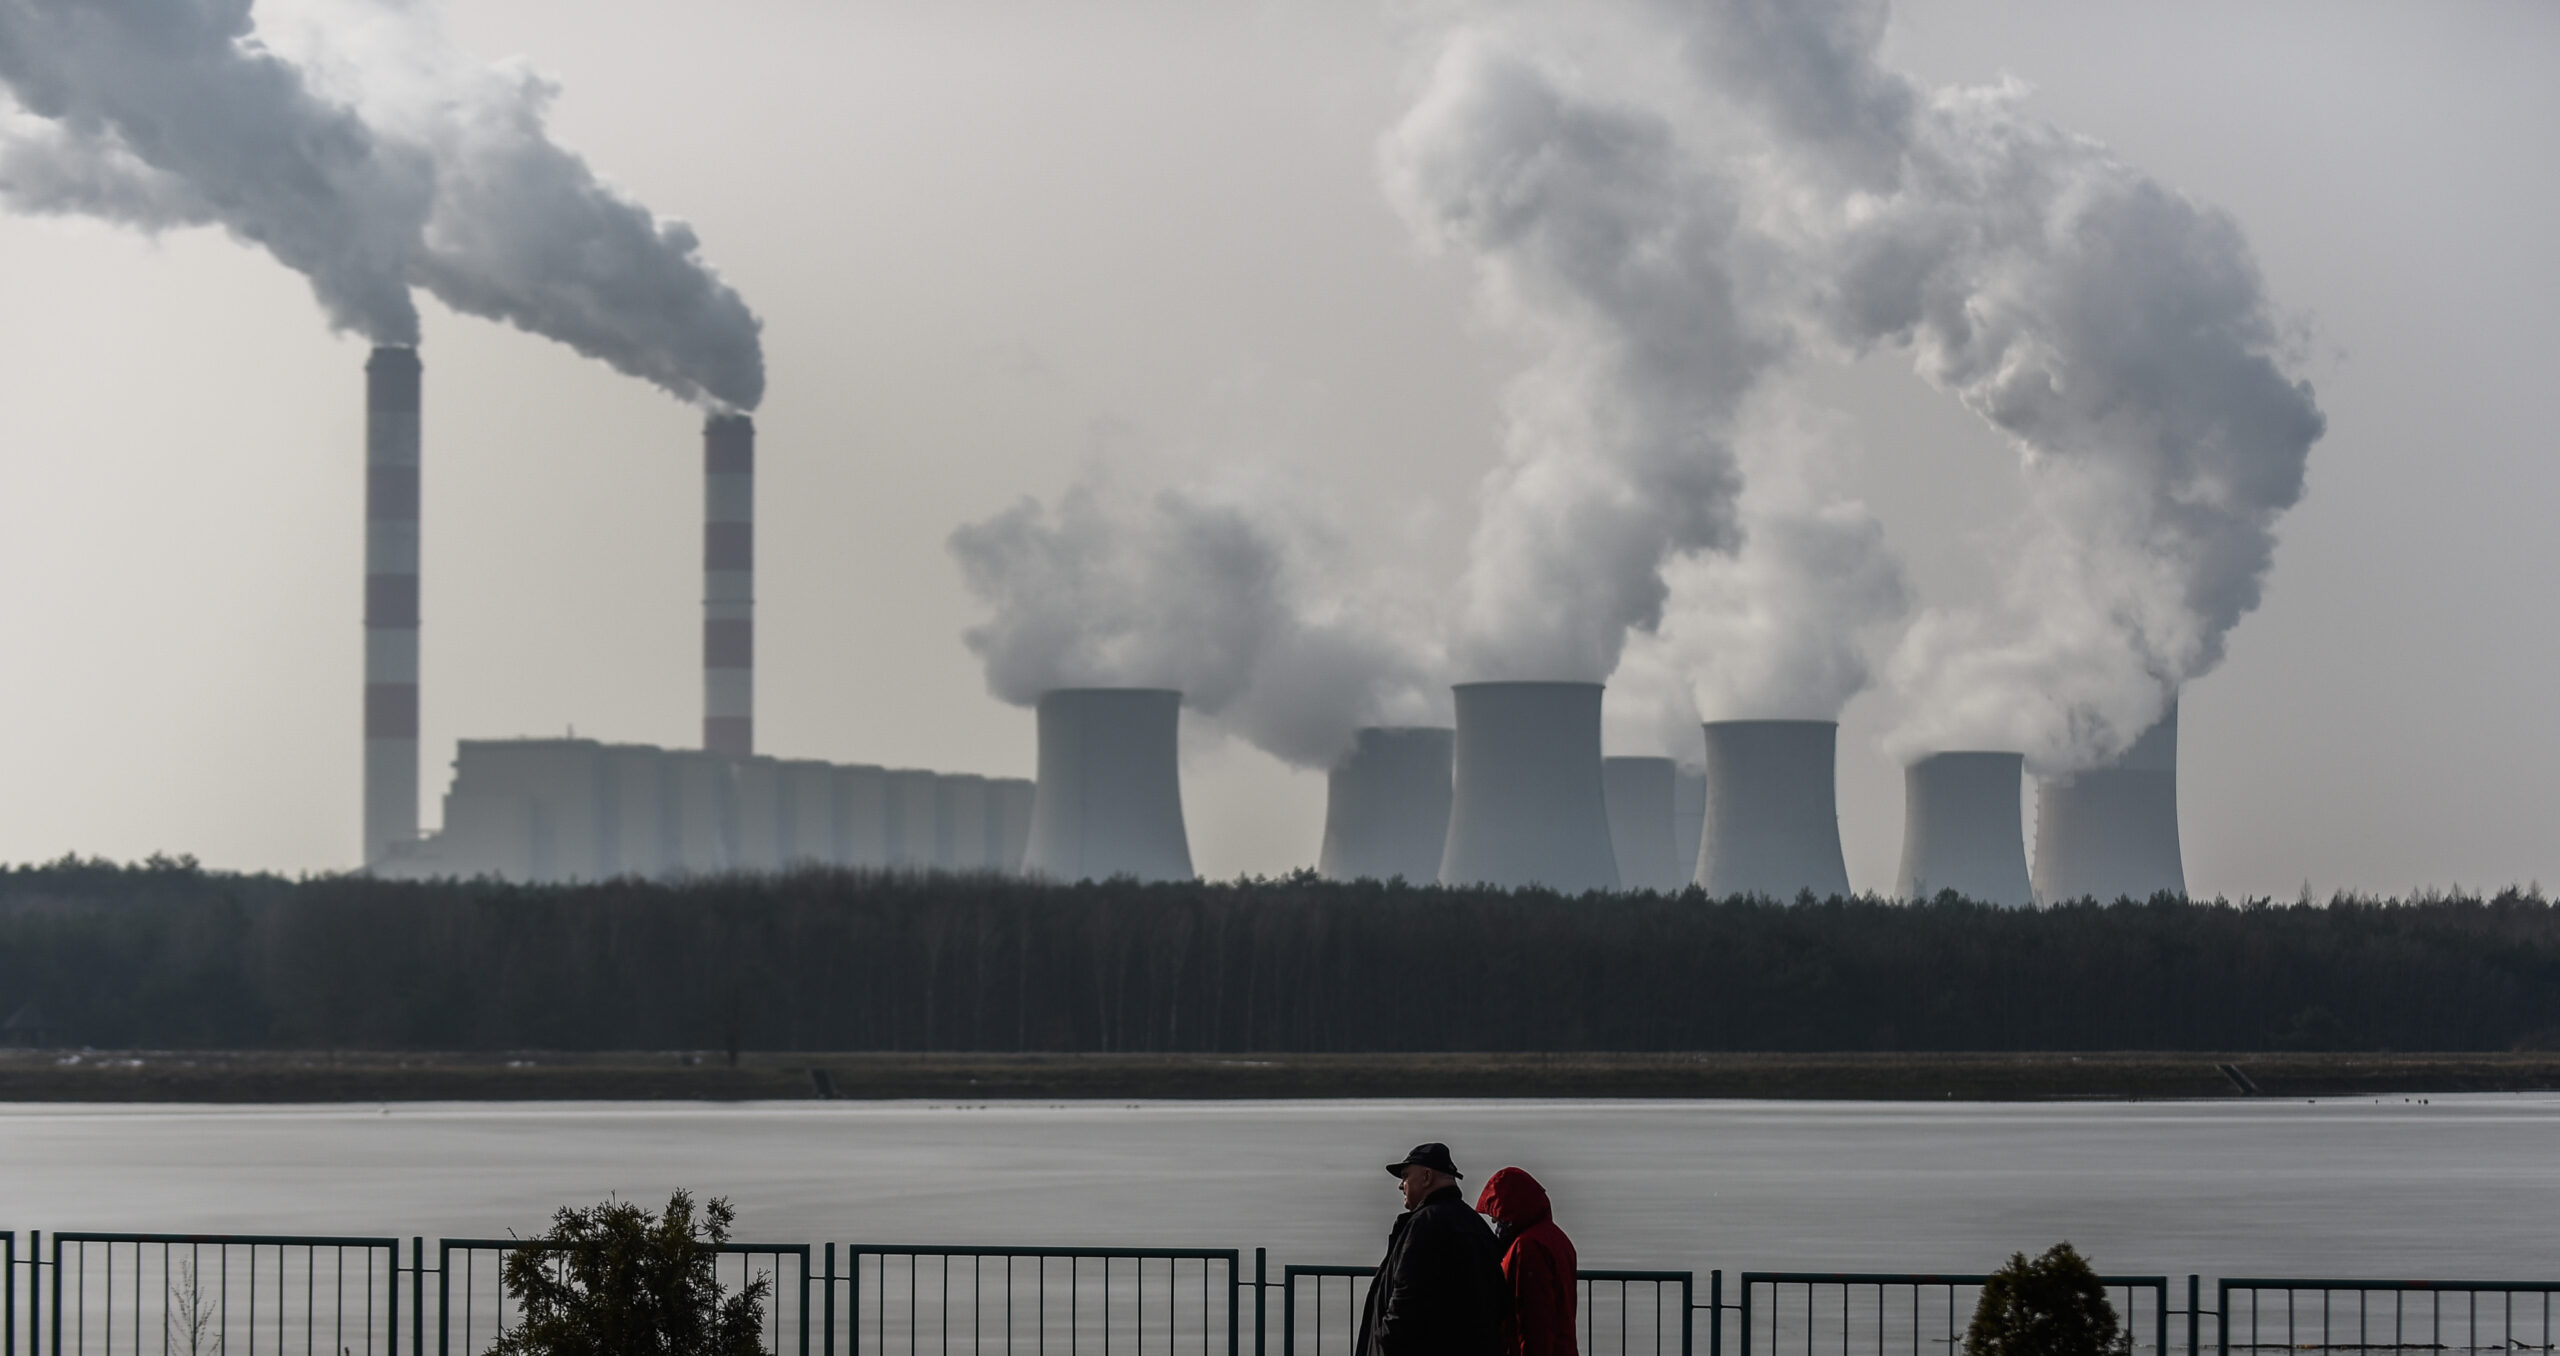 While Poland’s energy market is heavily dependent on coal, Enea was warned its proposed power plant could become a stranded asset, because of increasing climate risks and changing environmental policy (Photo: Omar Marques/Getty Images) 